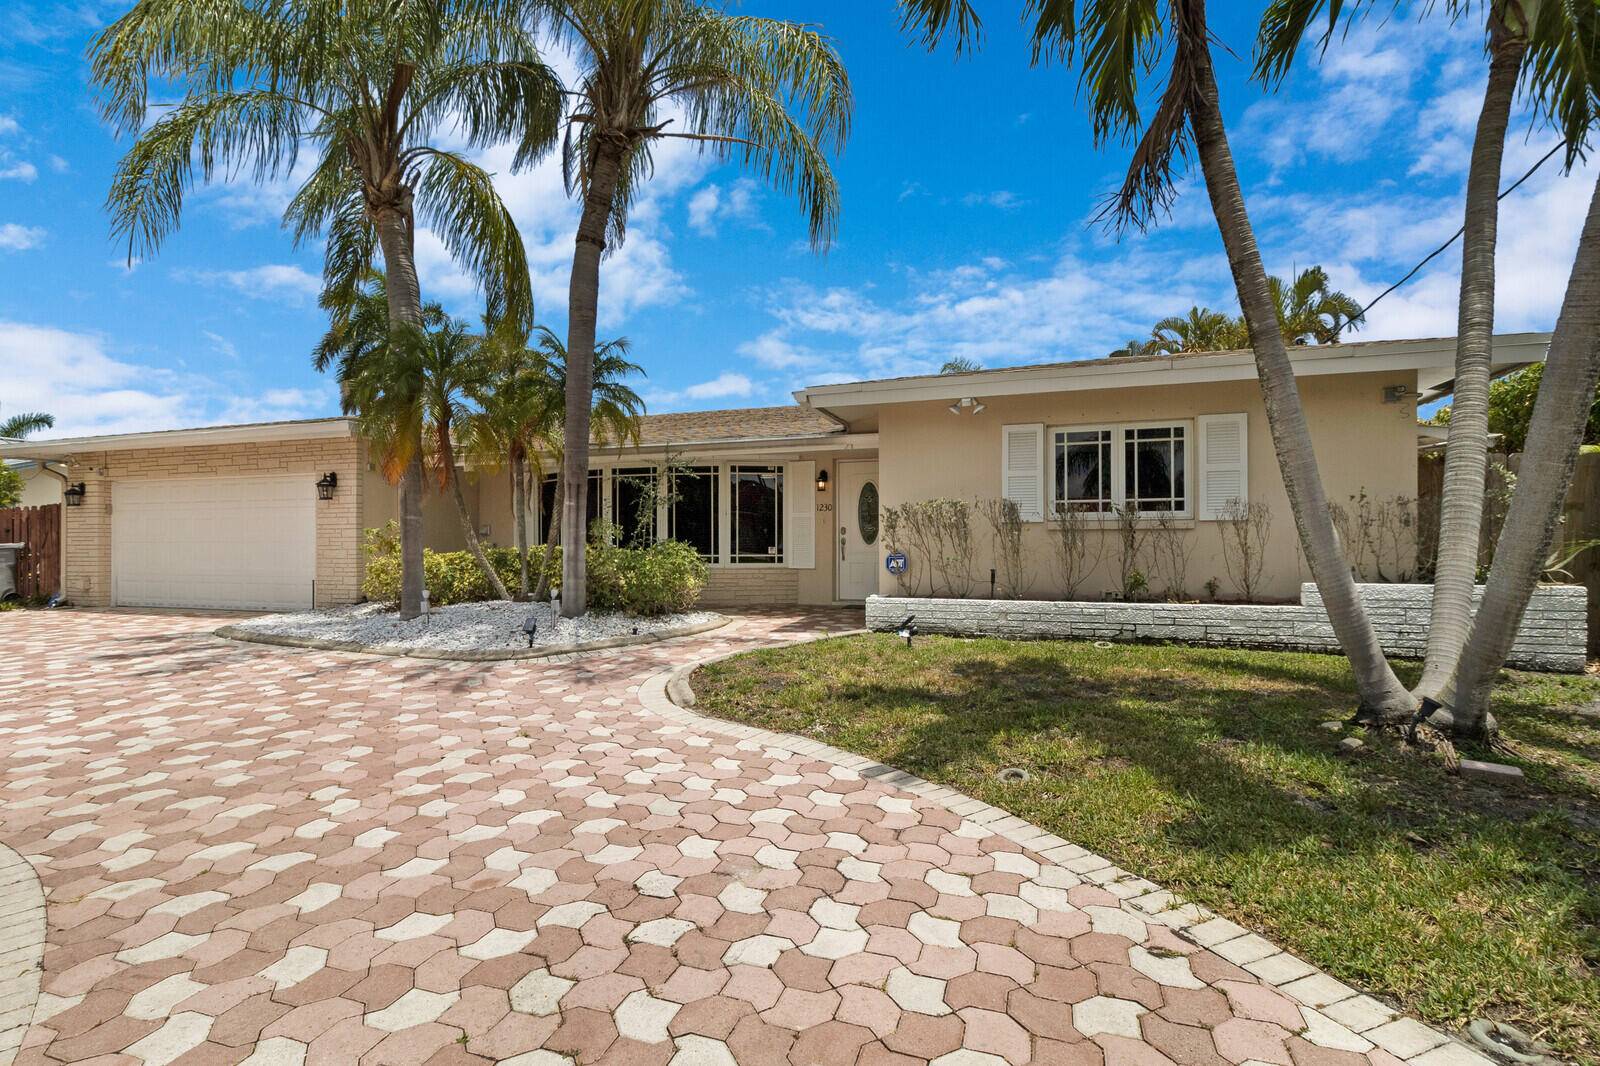 DON'T WAIT to see this 80' WATERFRONT HOME in coveted COUNTRY CLUB ISLES.